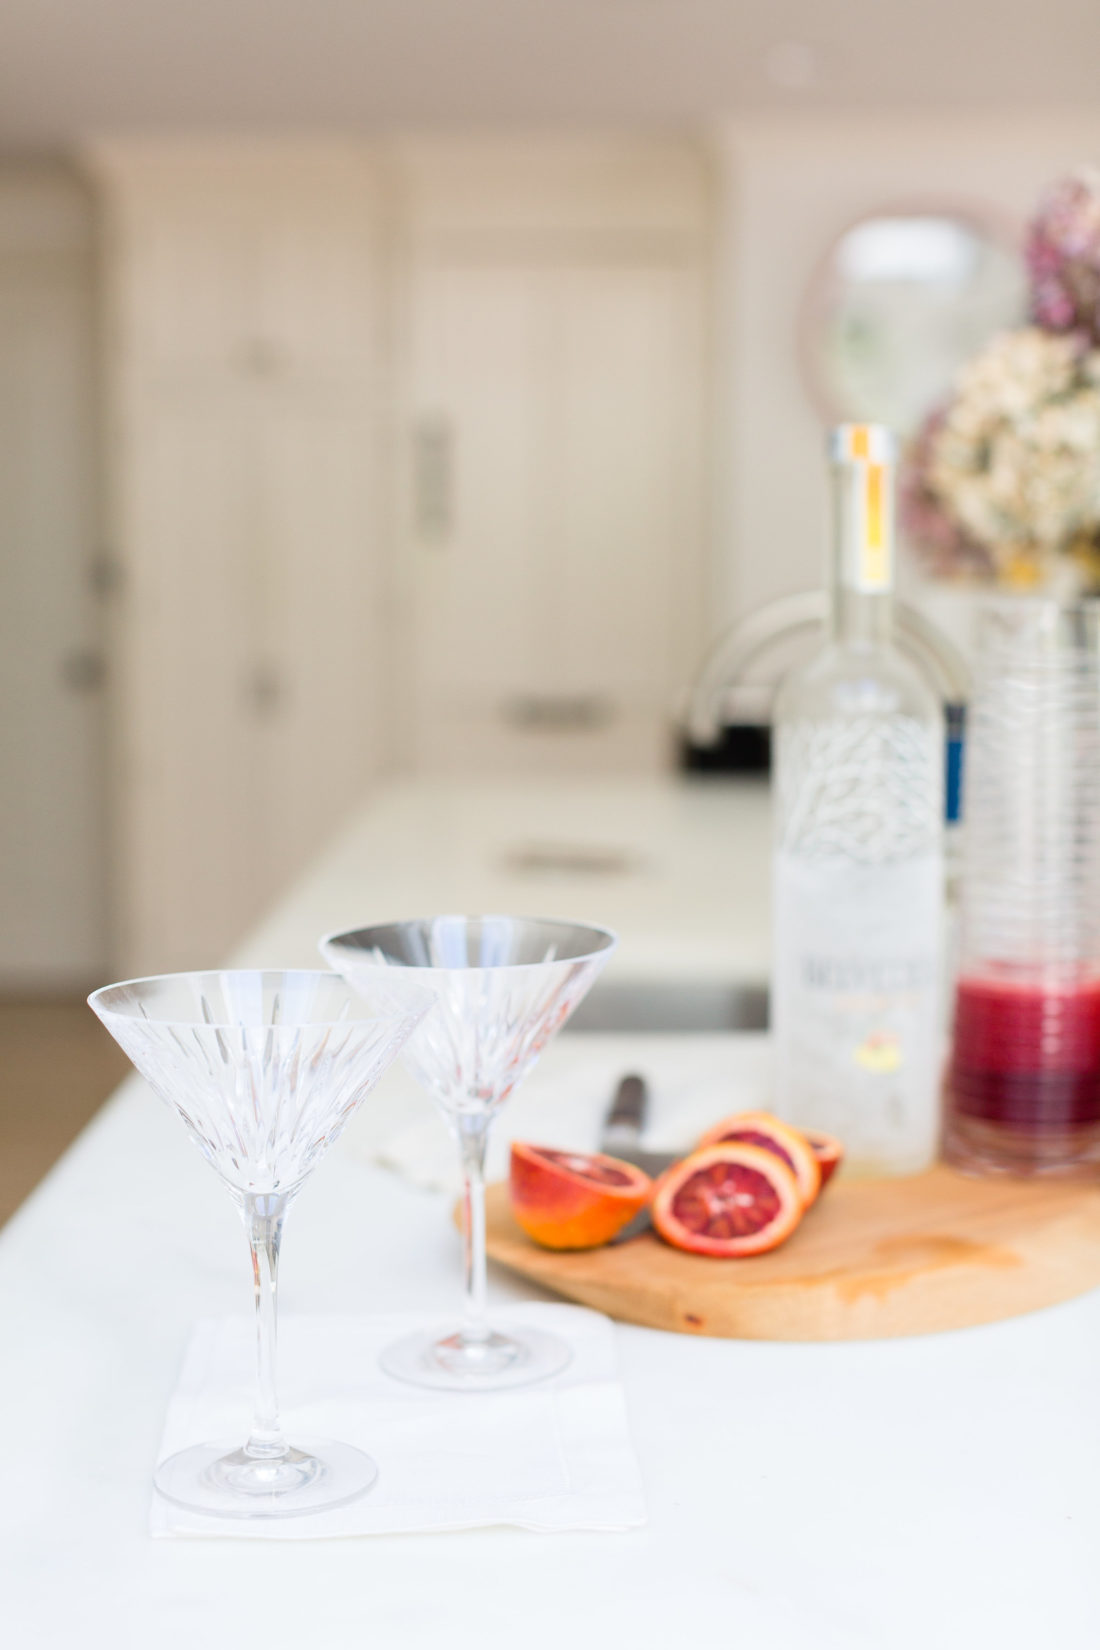 Eva Amurri Martino prepares to make blood orange and ginger martinis in the kitchen of her connecticut home